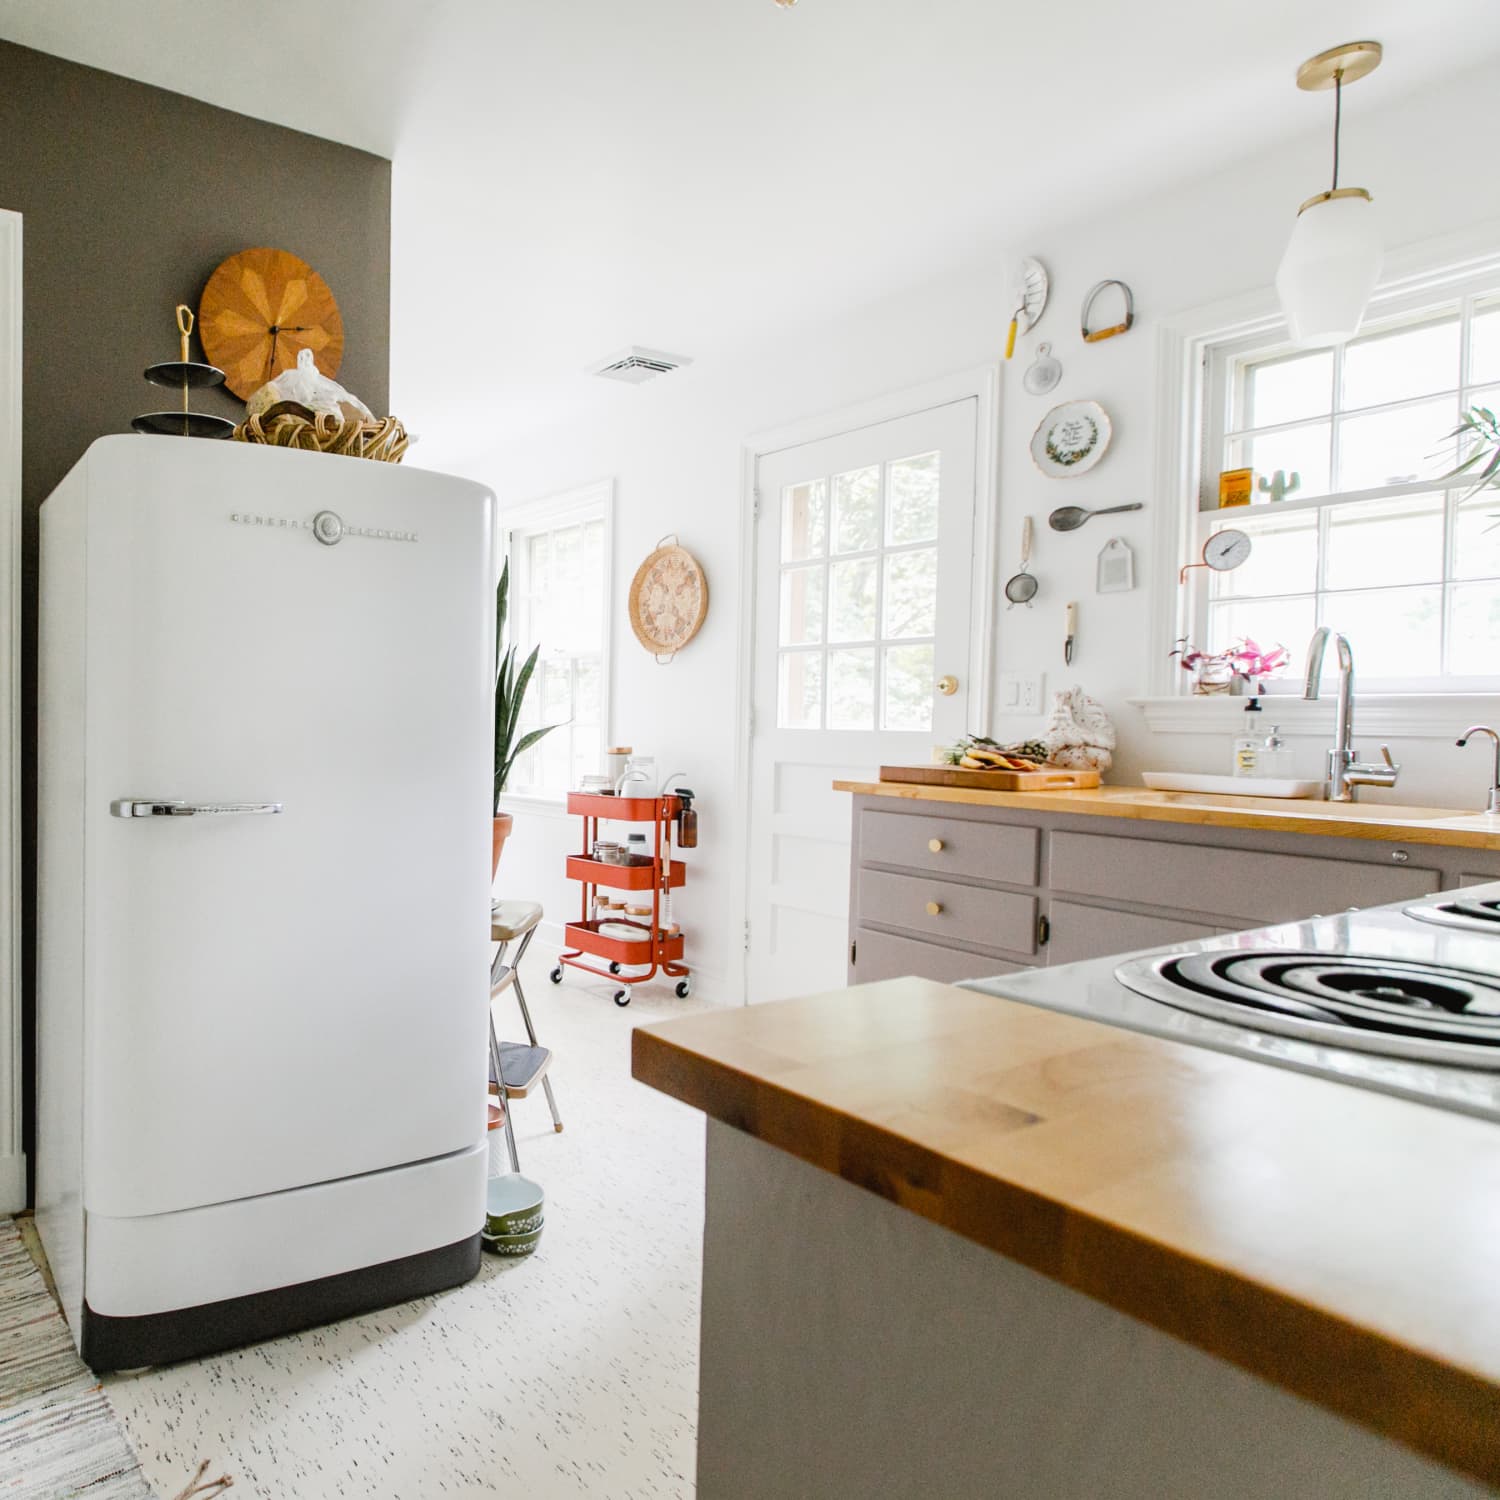 Super kitchen: Stove, fridge and wifi countertop is now the trend